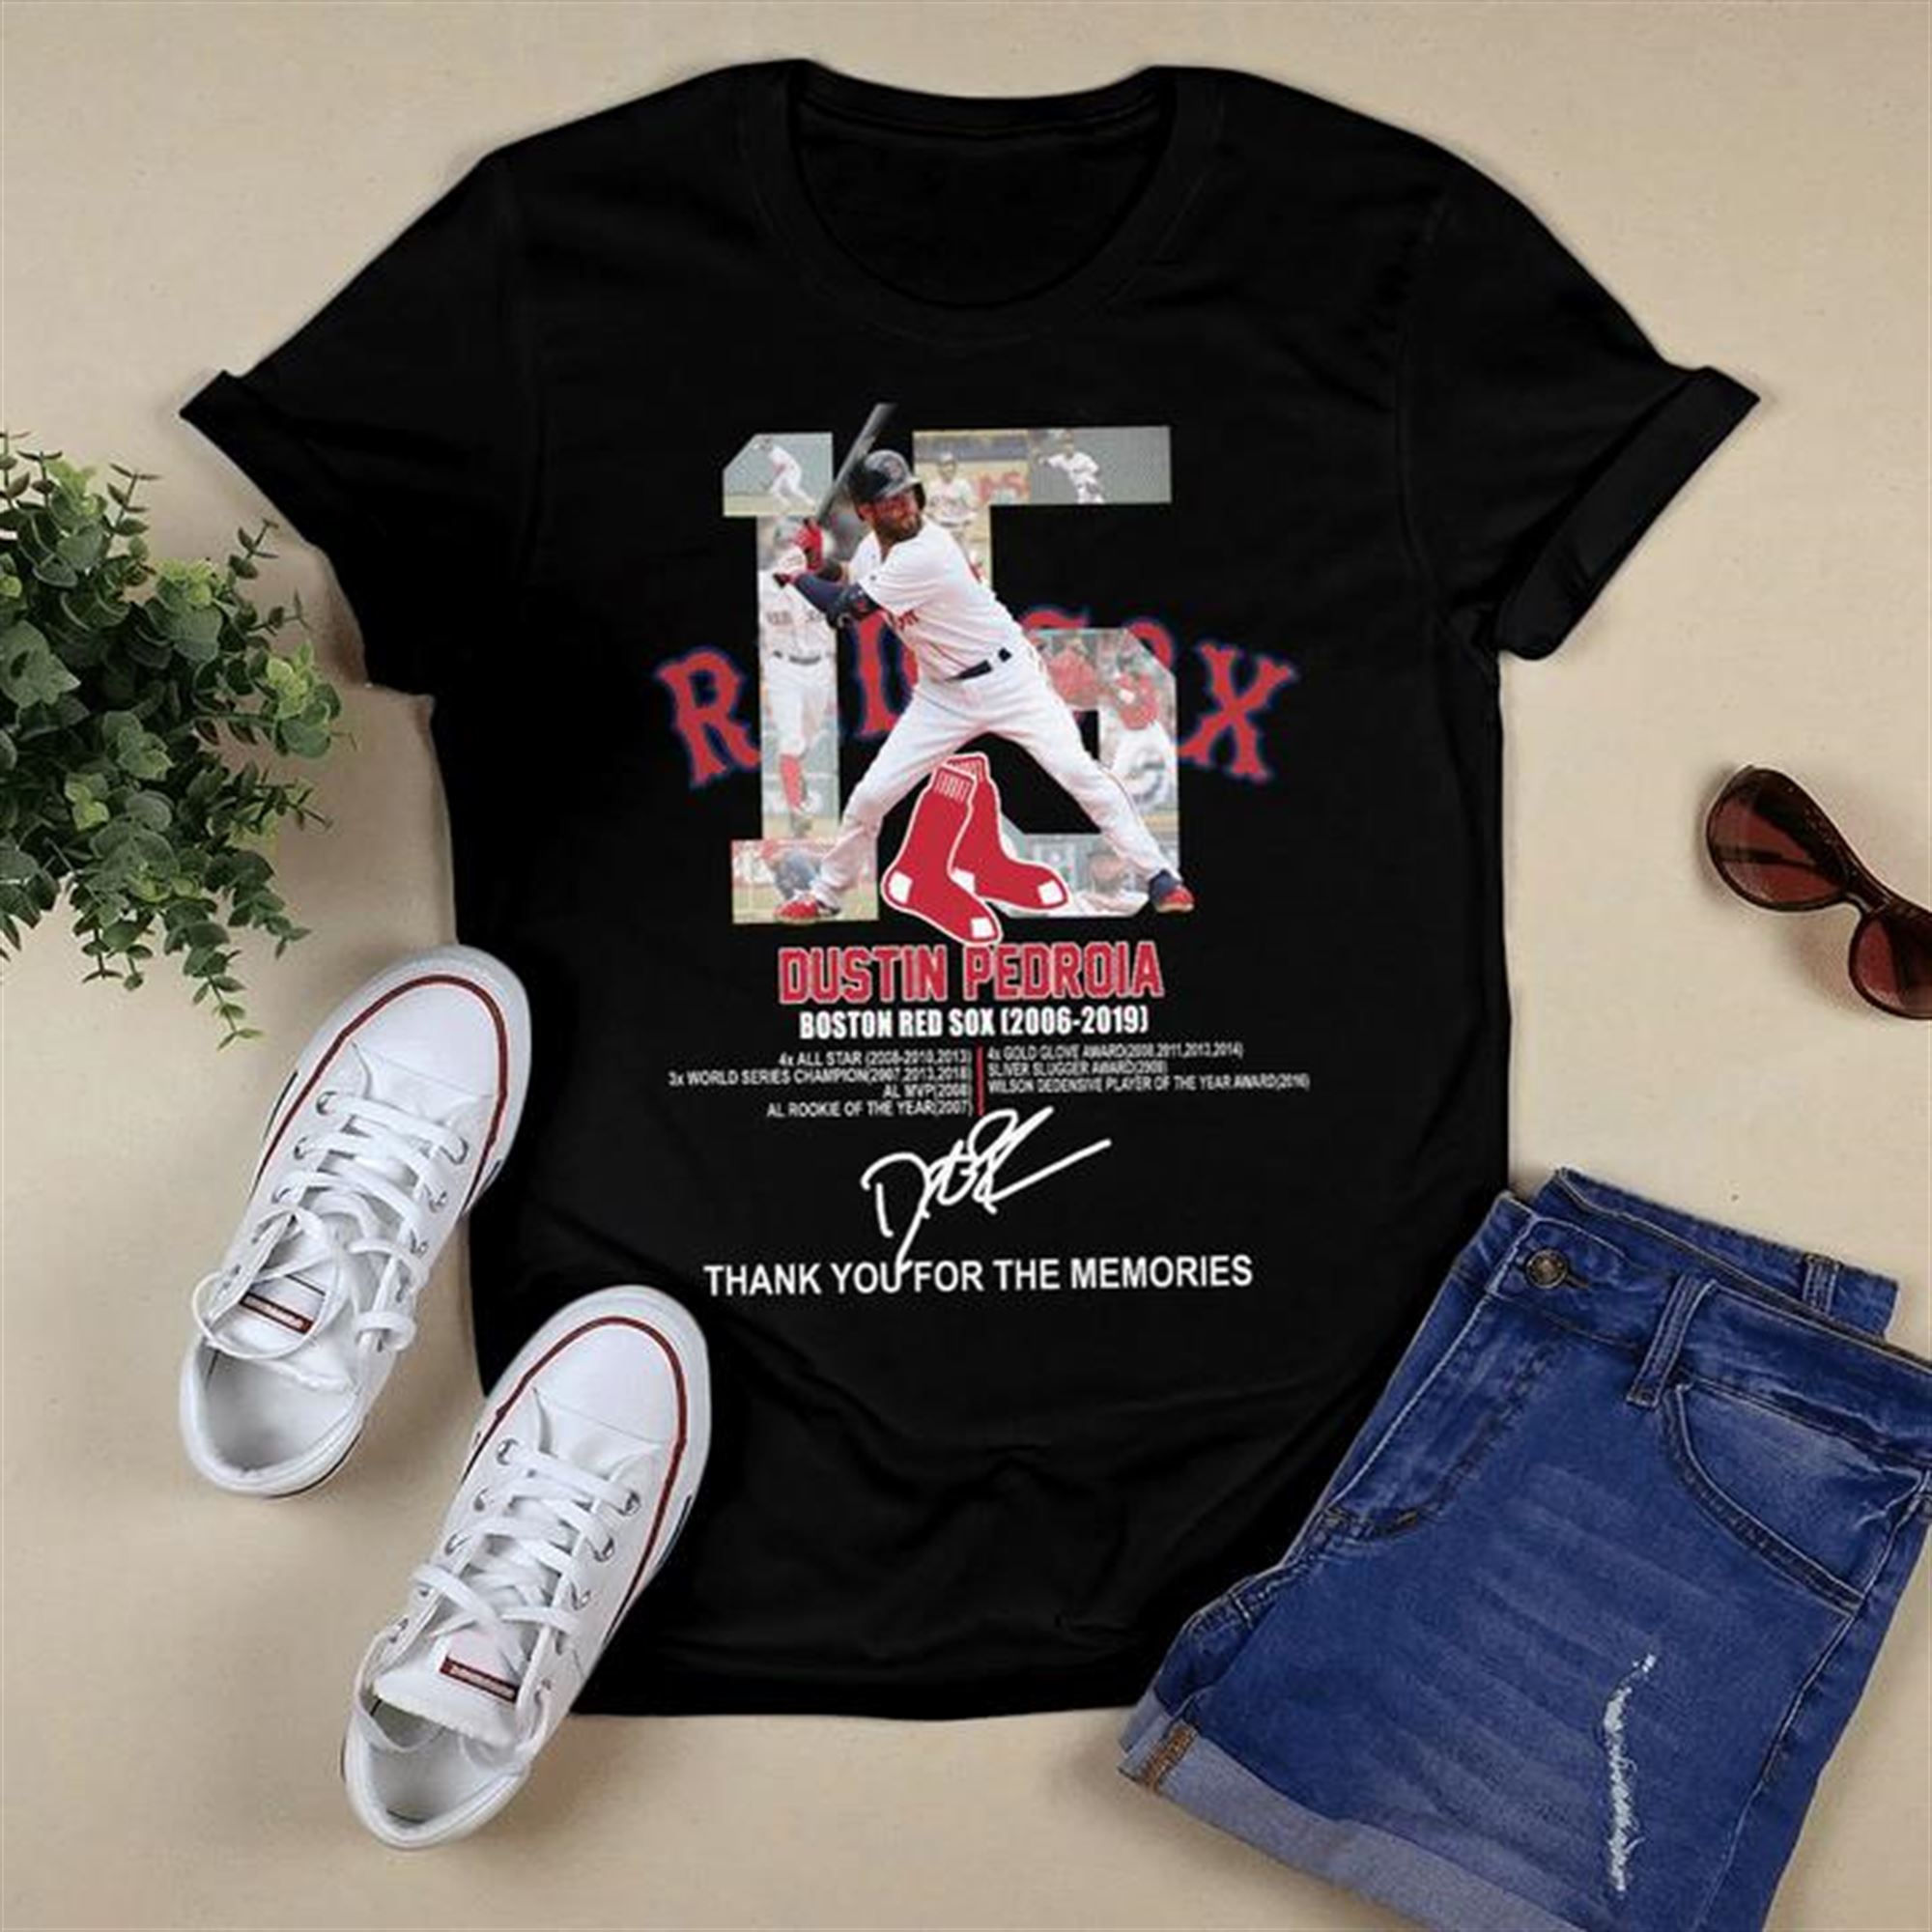 Dustin Pedroia Boston Red Sox Thank You For The Memories Signatures T-shirt Plus Size Up To 5x